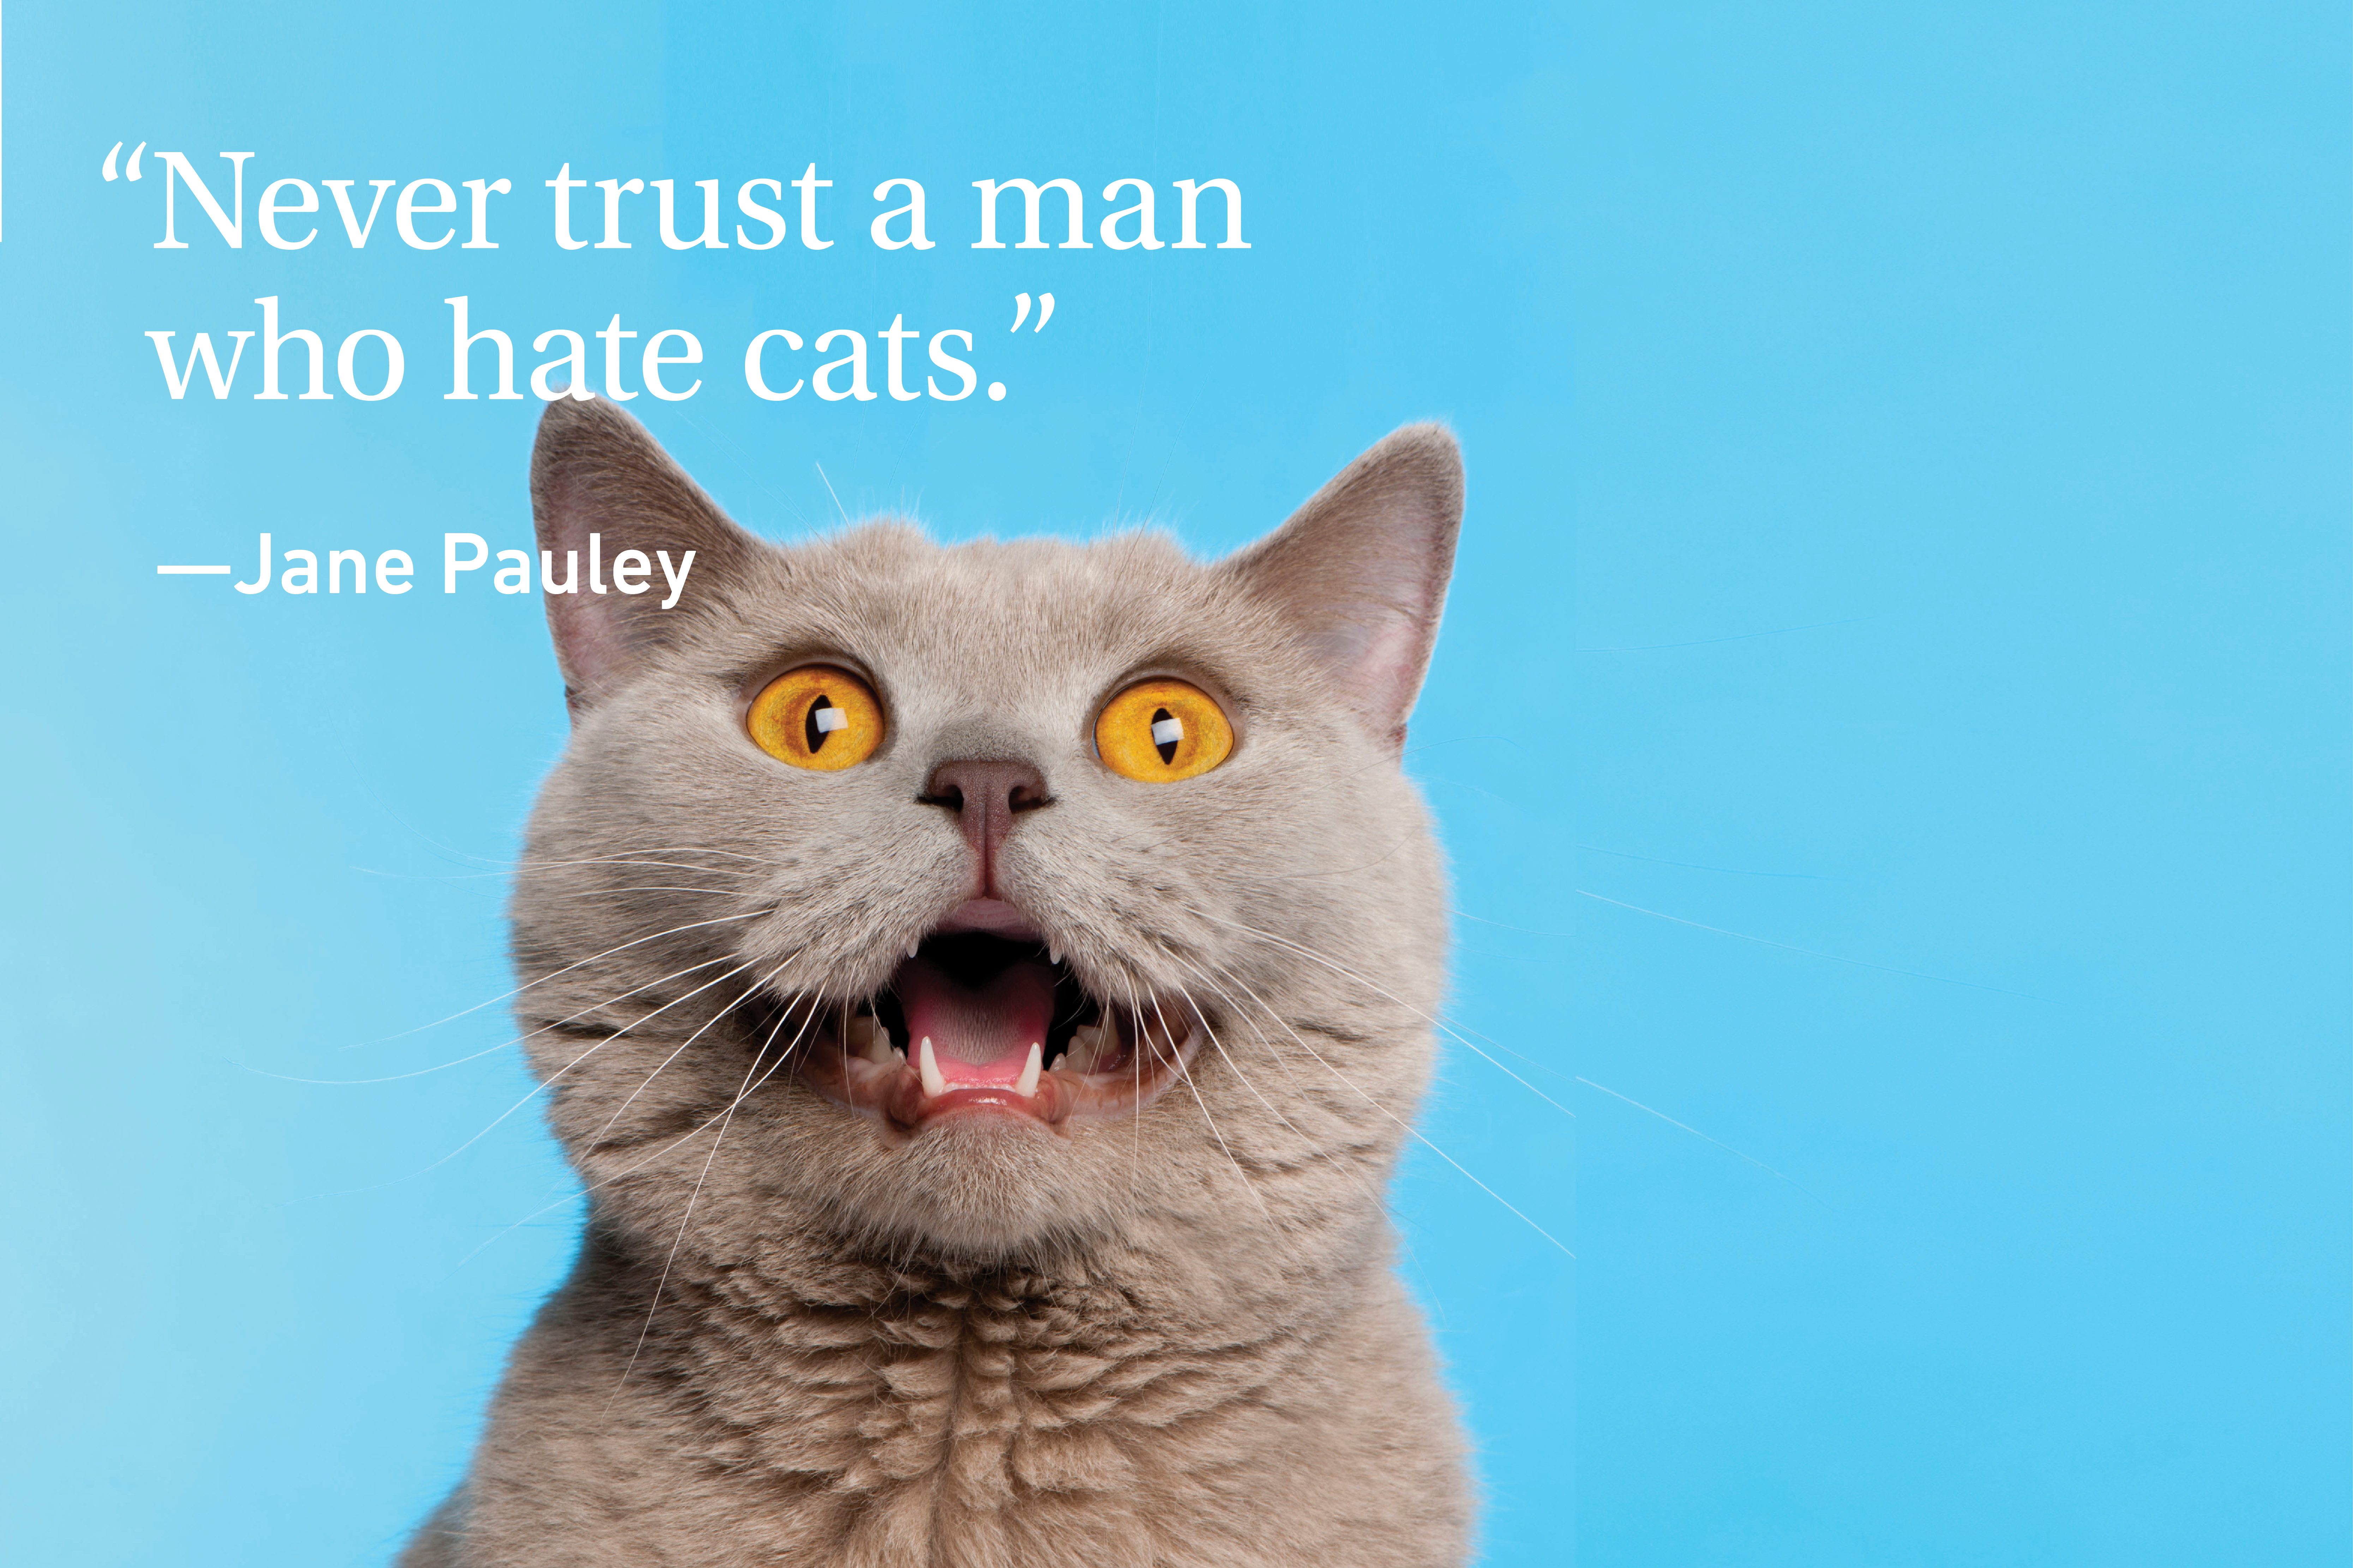 Funny Cat growling on cyan background with a quote